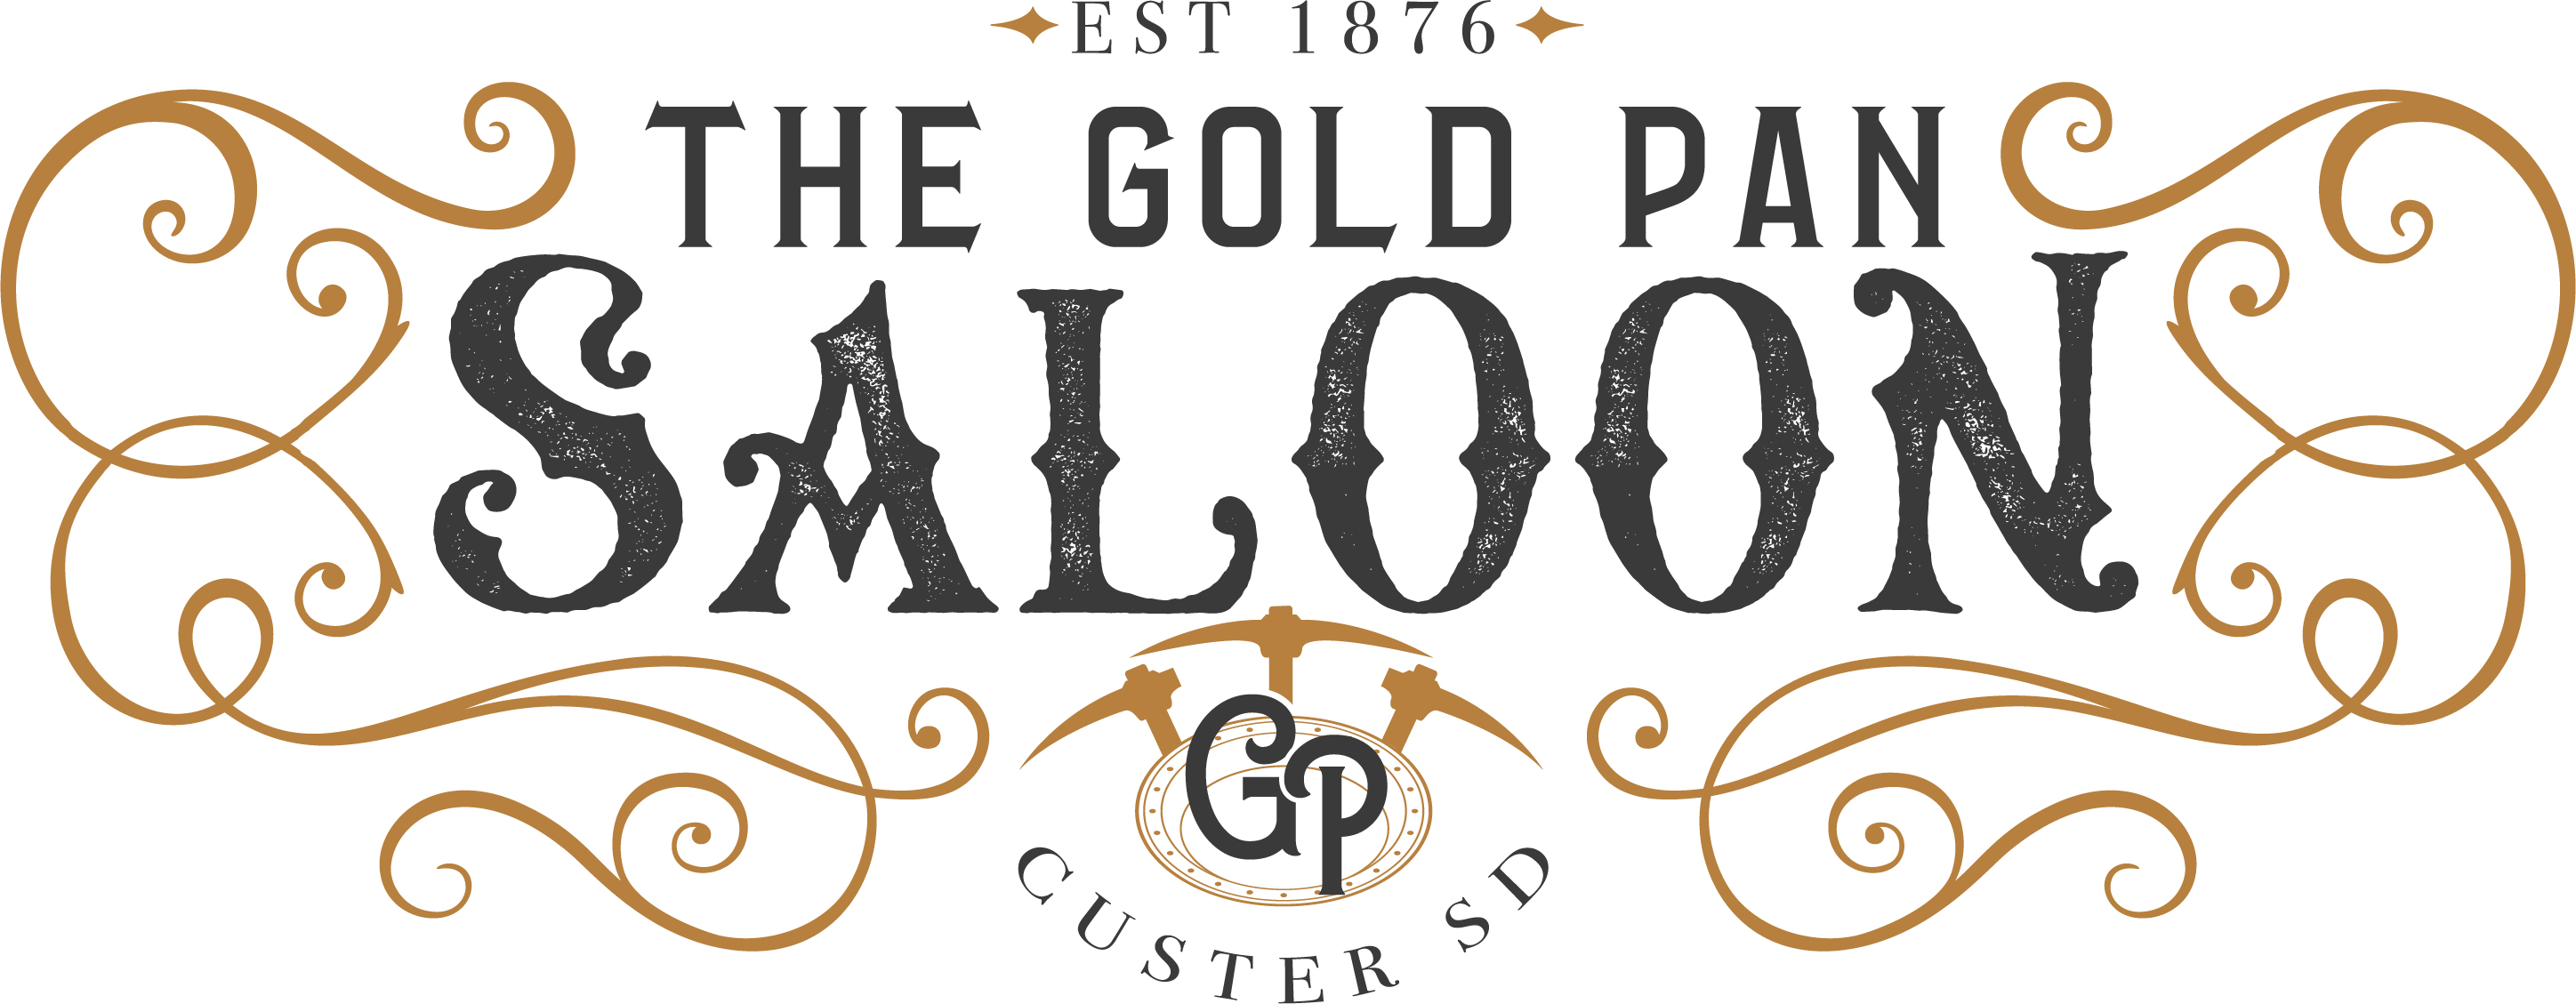 The Gold Pan Saloon